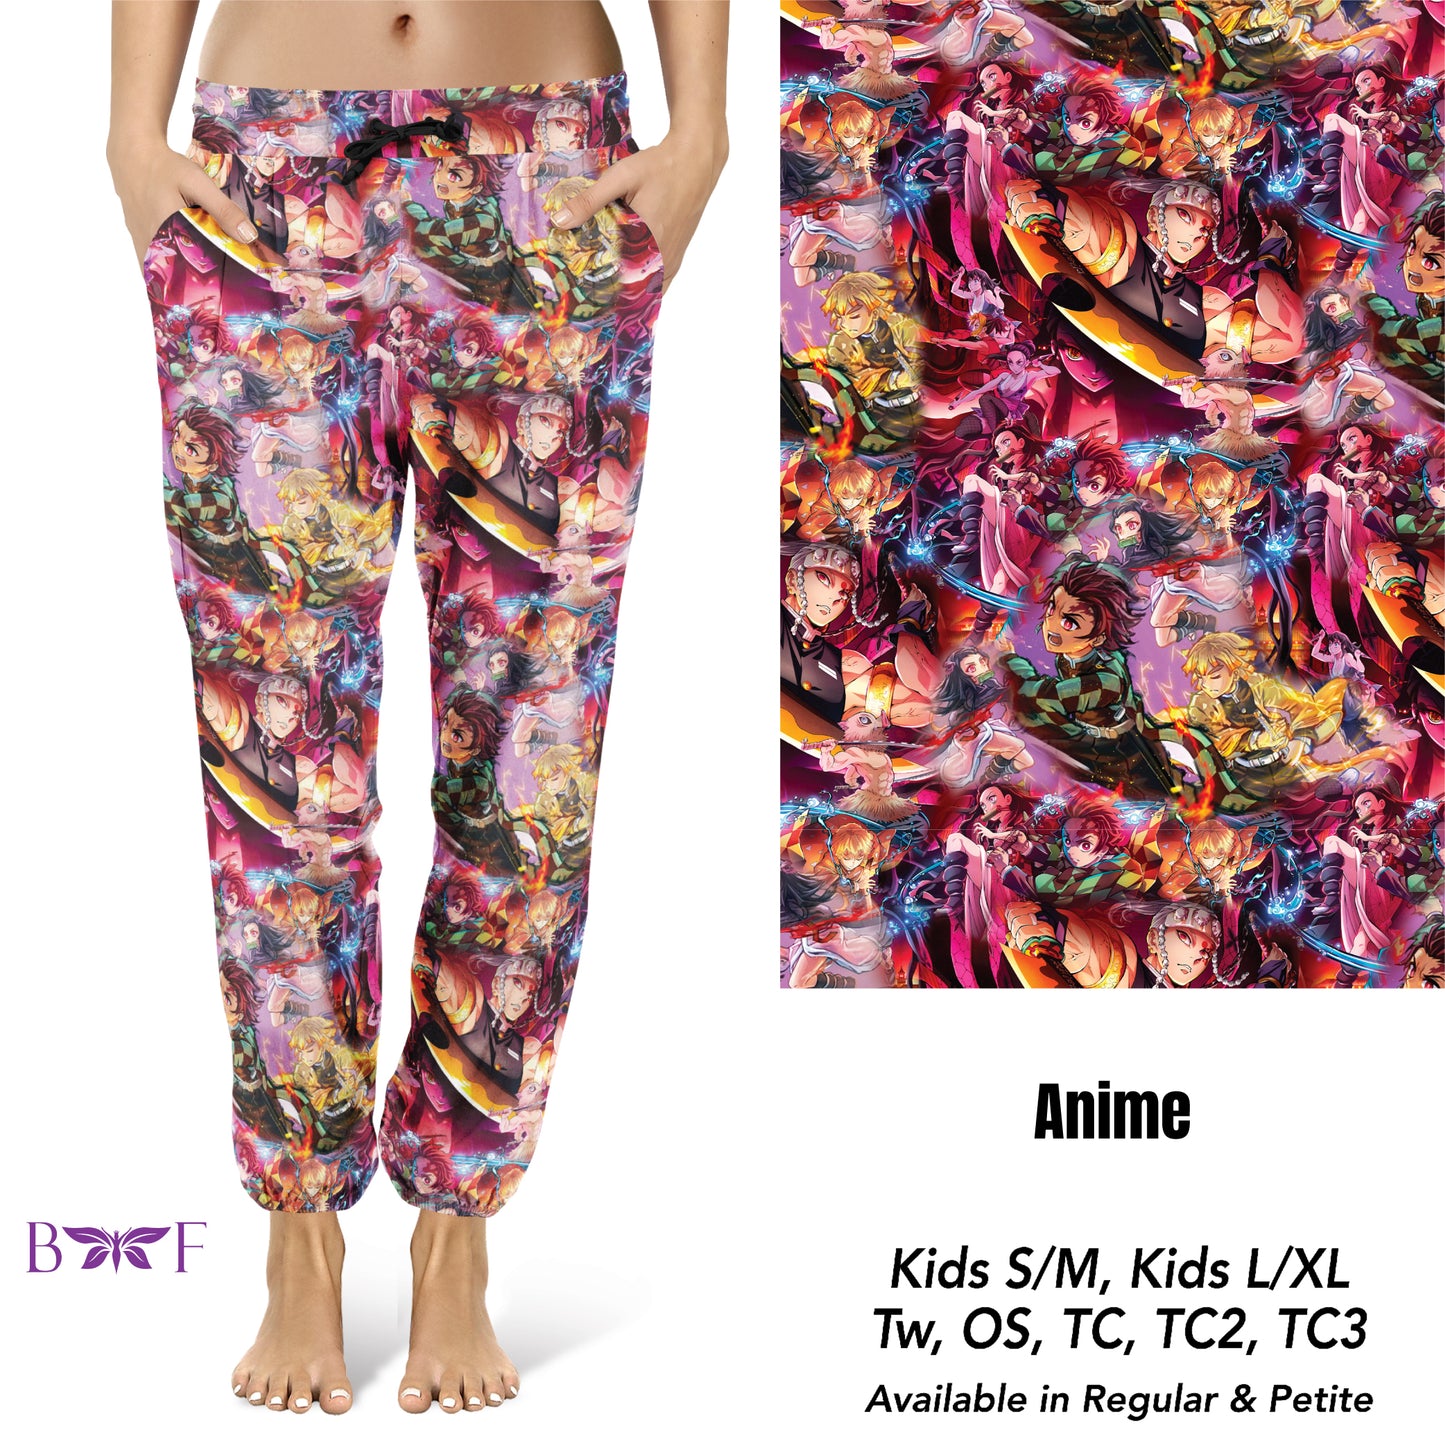 Anime leggings and Lounge Pants with pockets